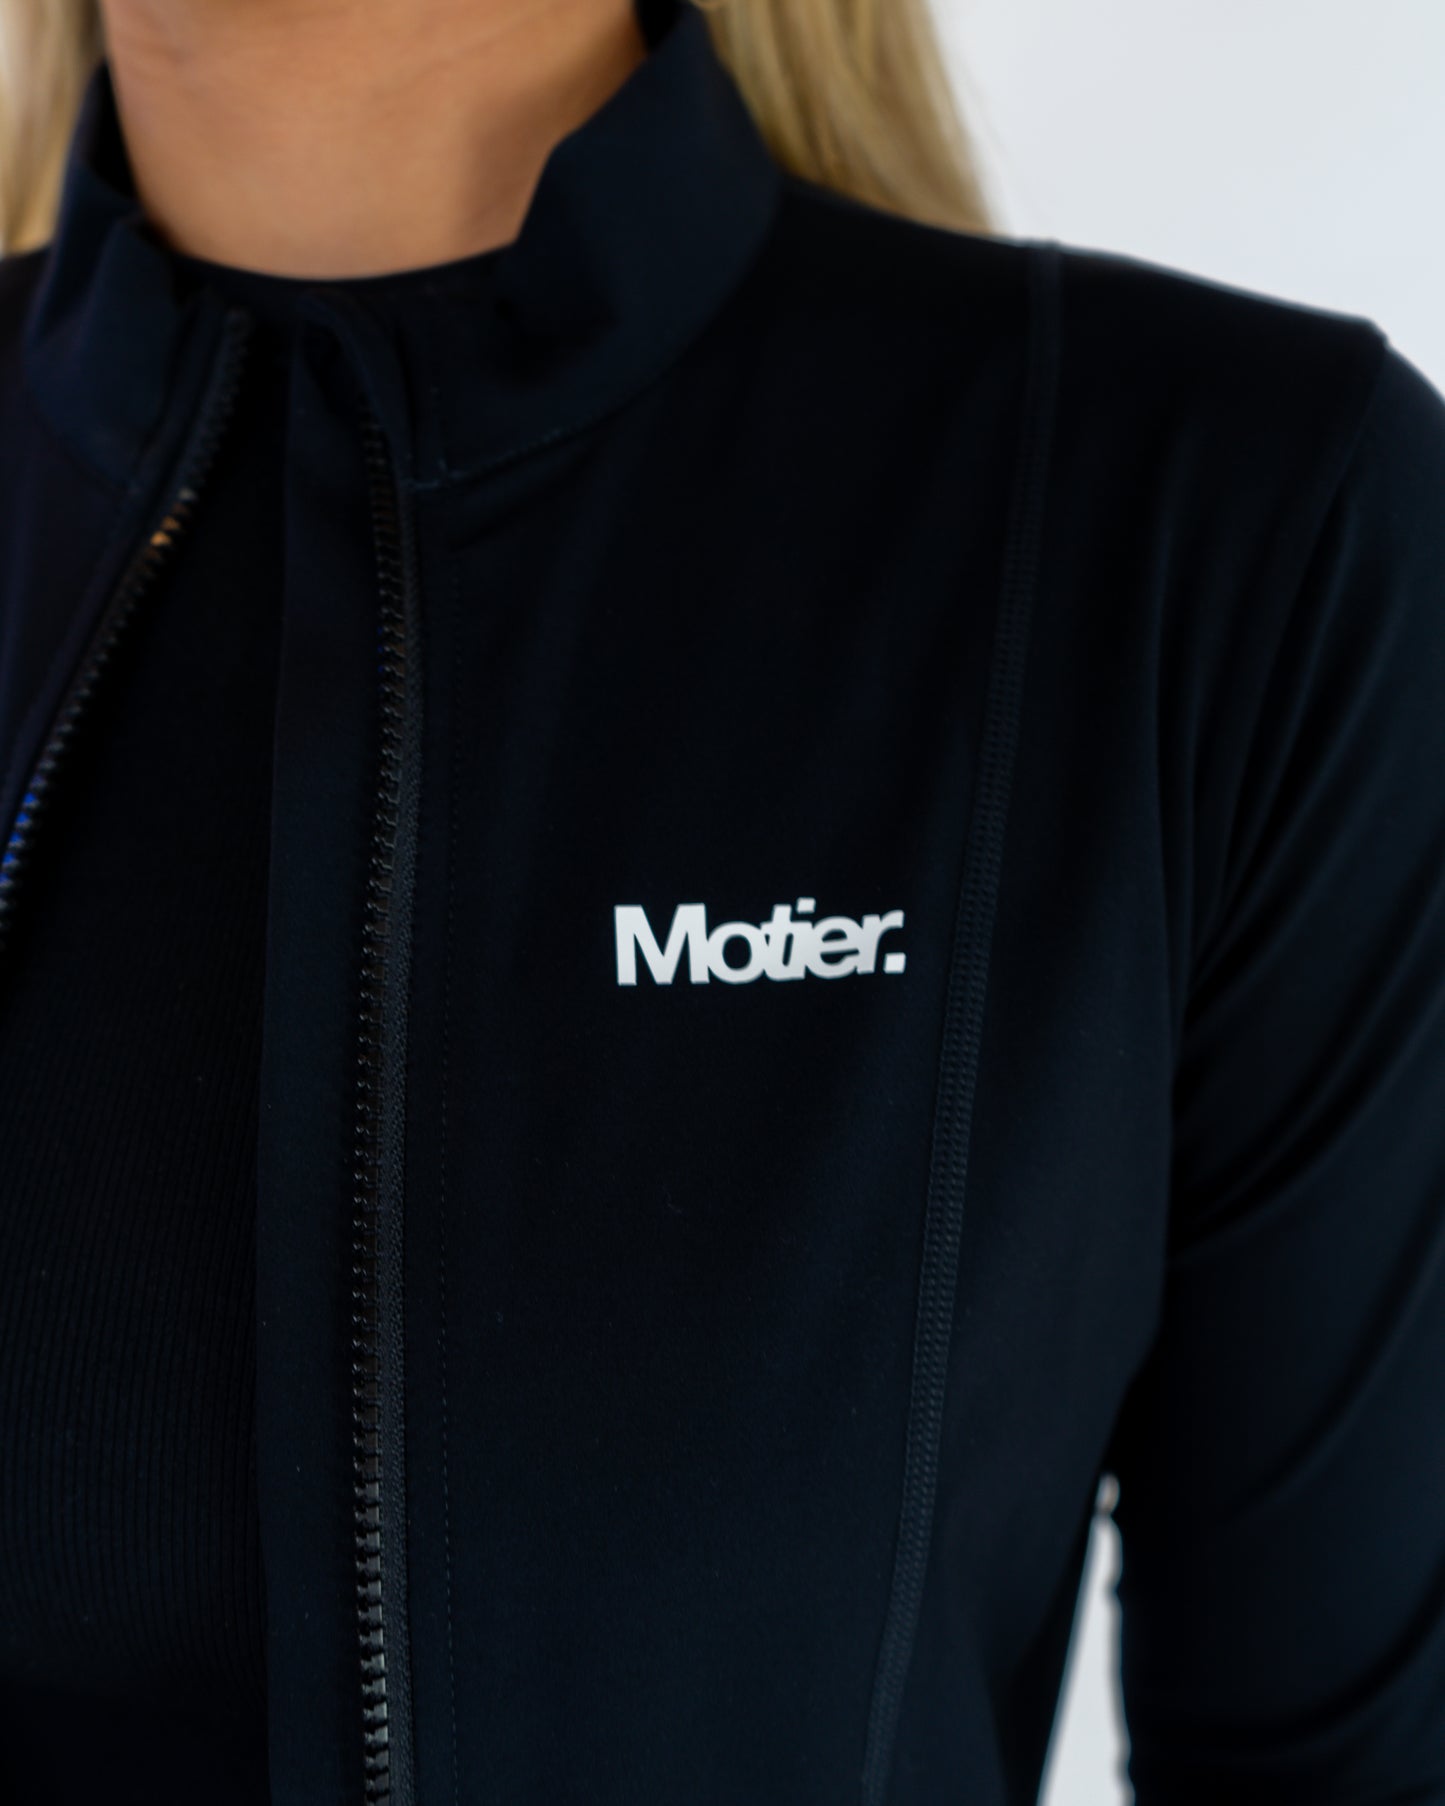 Fitted M-Star Active Jacket (Black)